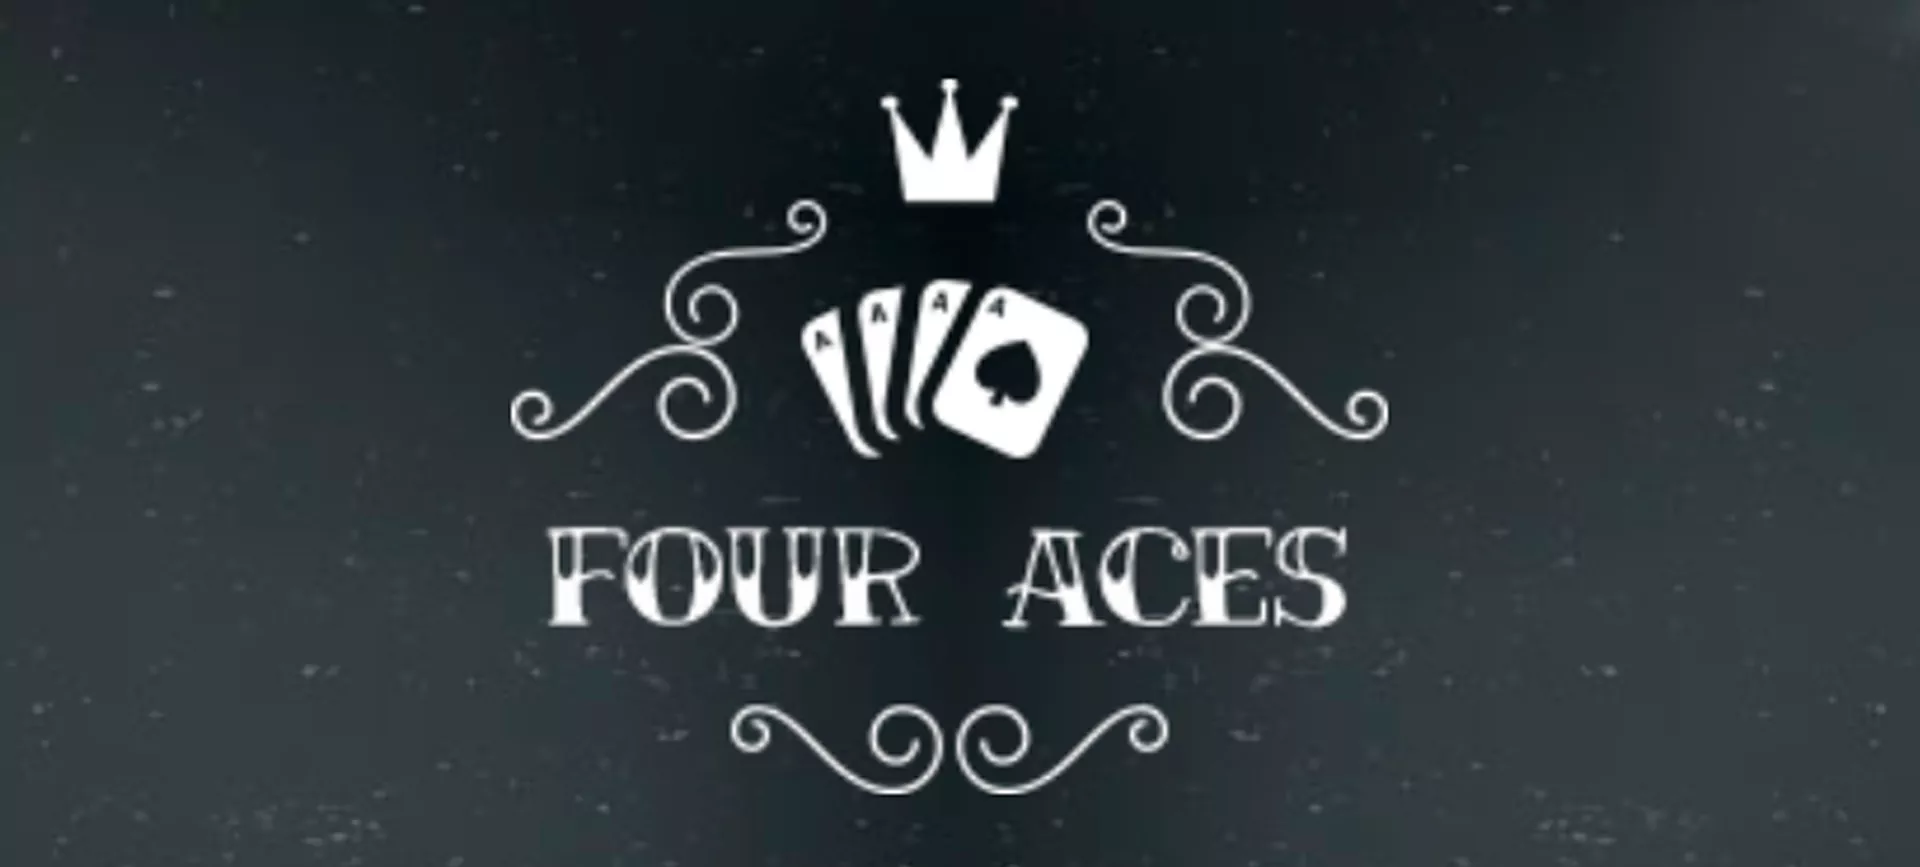 Play online in the Four Aces game.